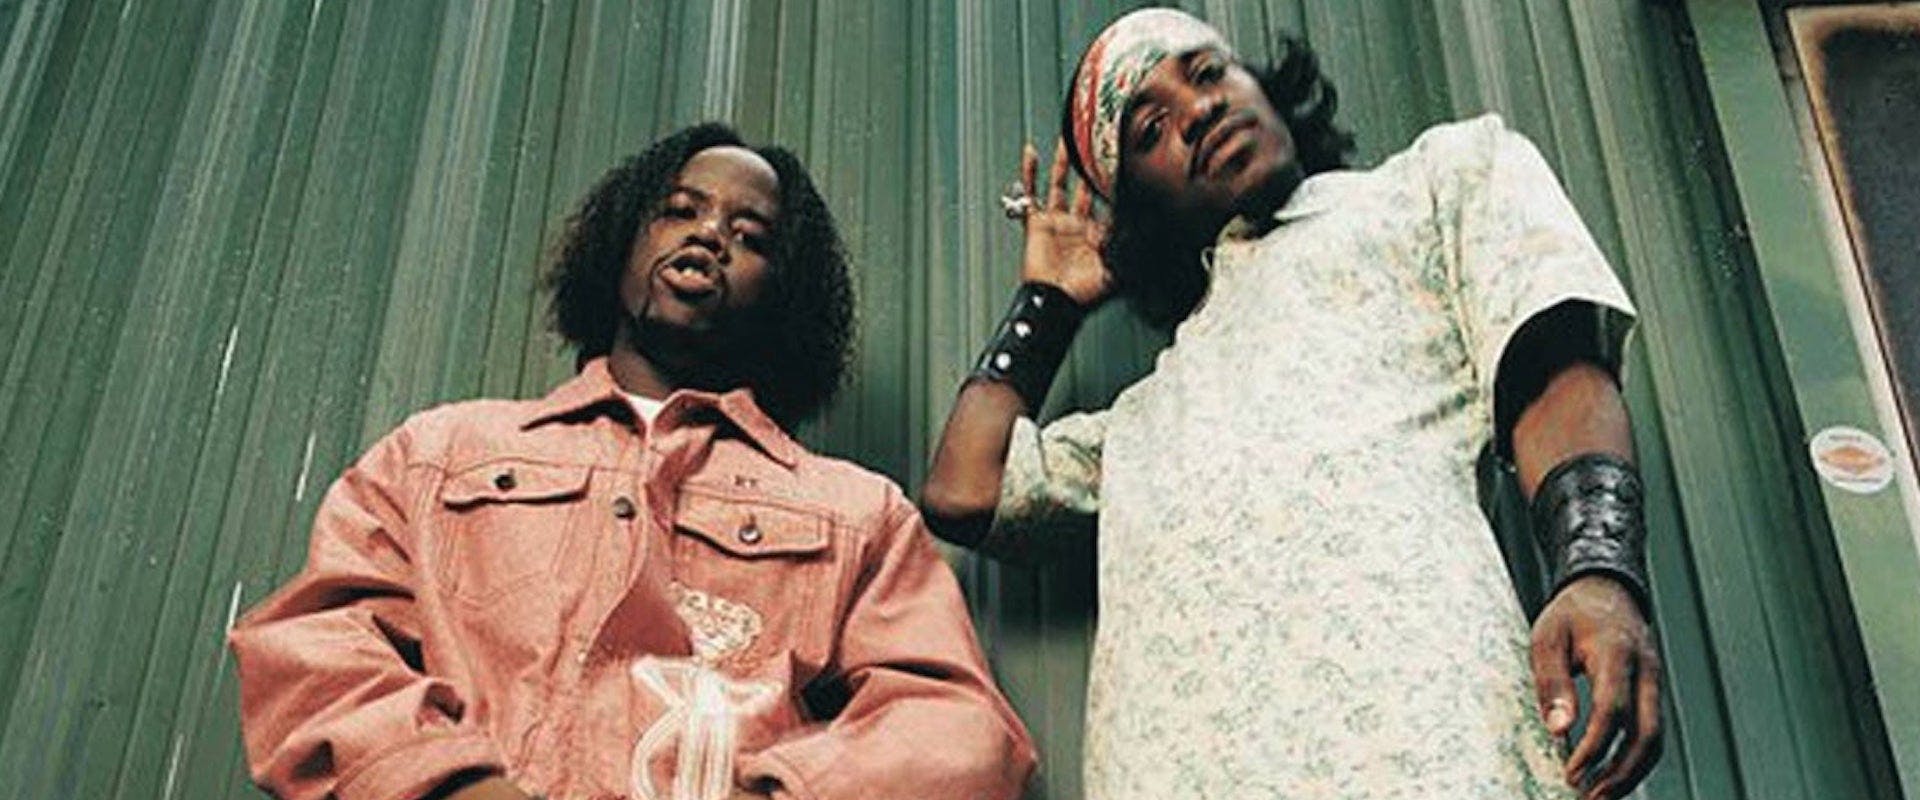 OutKast to Be Honored at Atlanta Braves Game